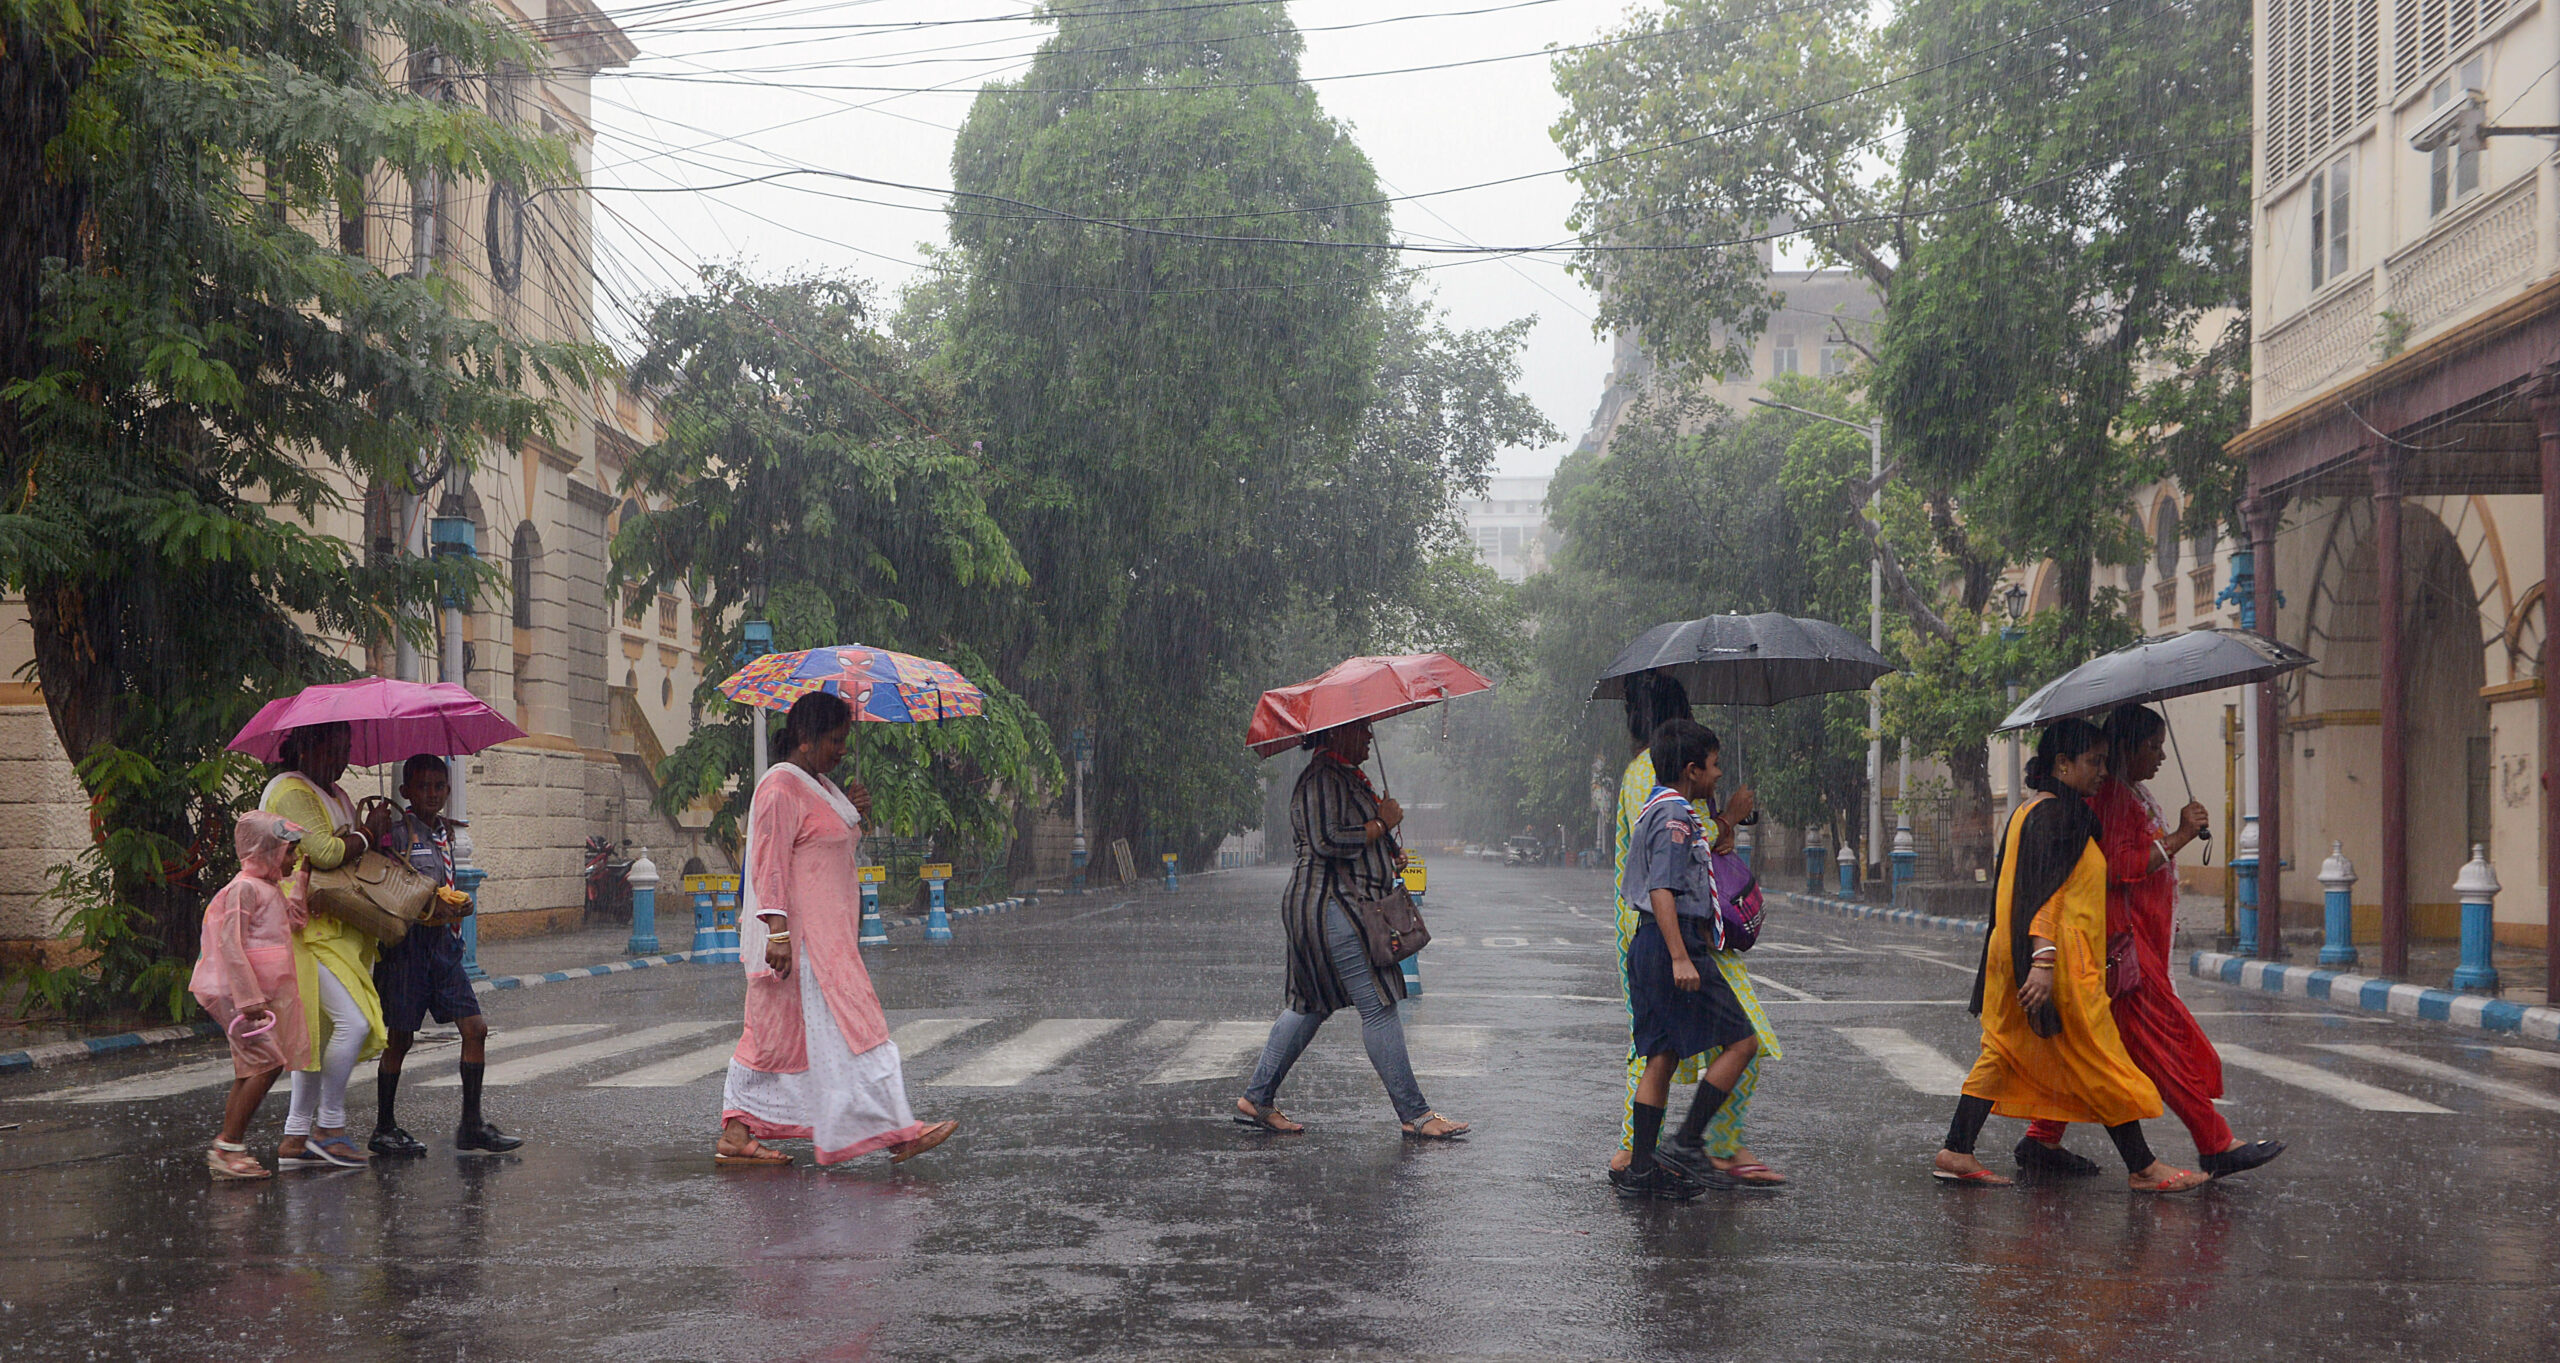 Students along with their parents during rainfall in Kolkata